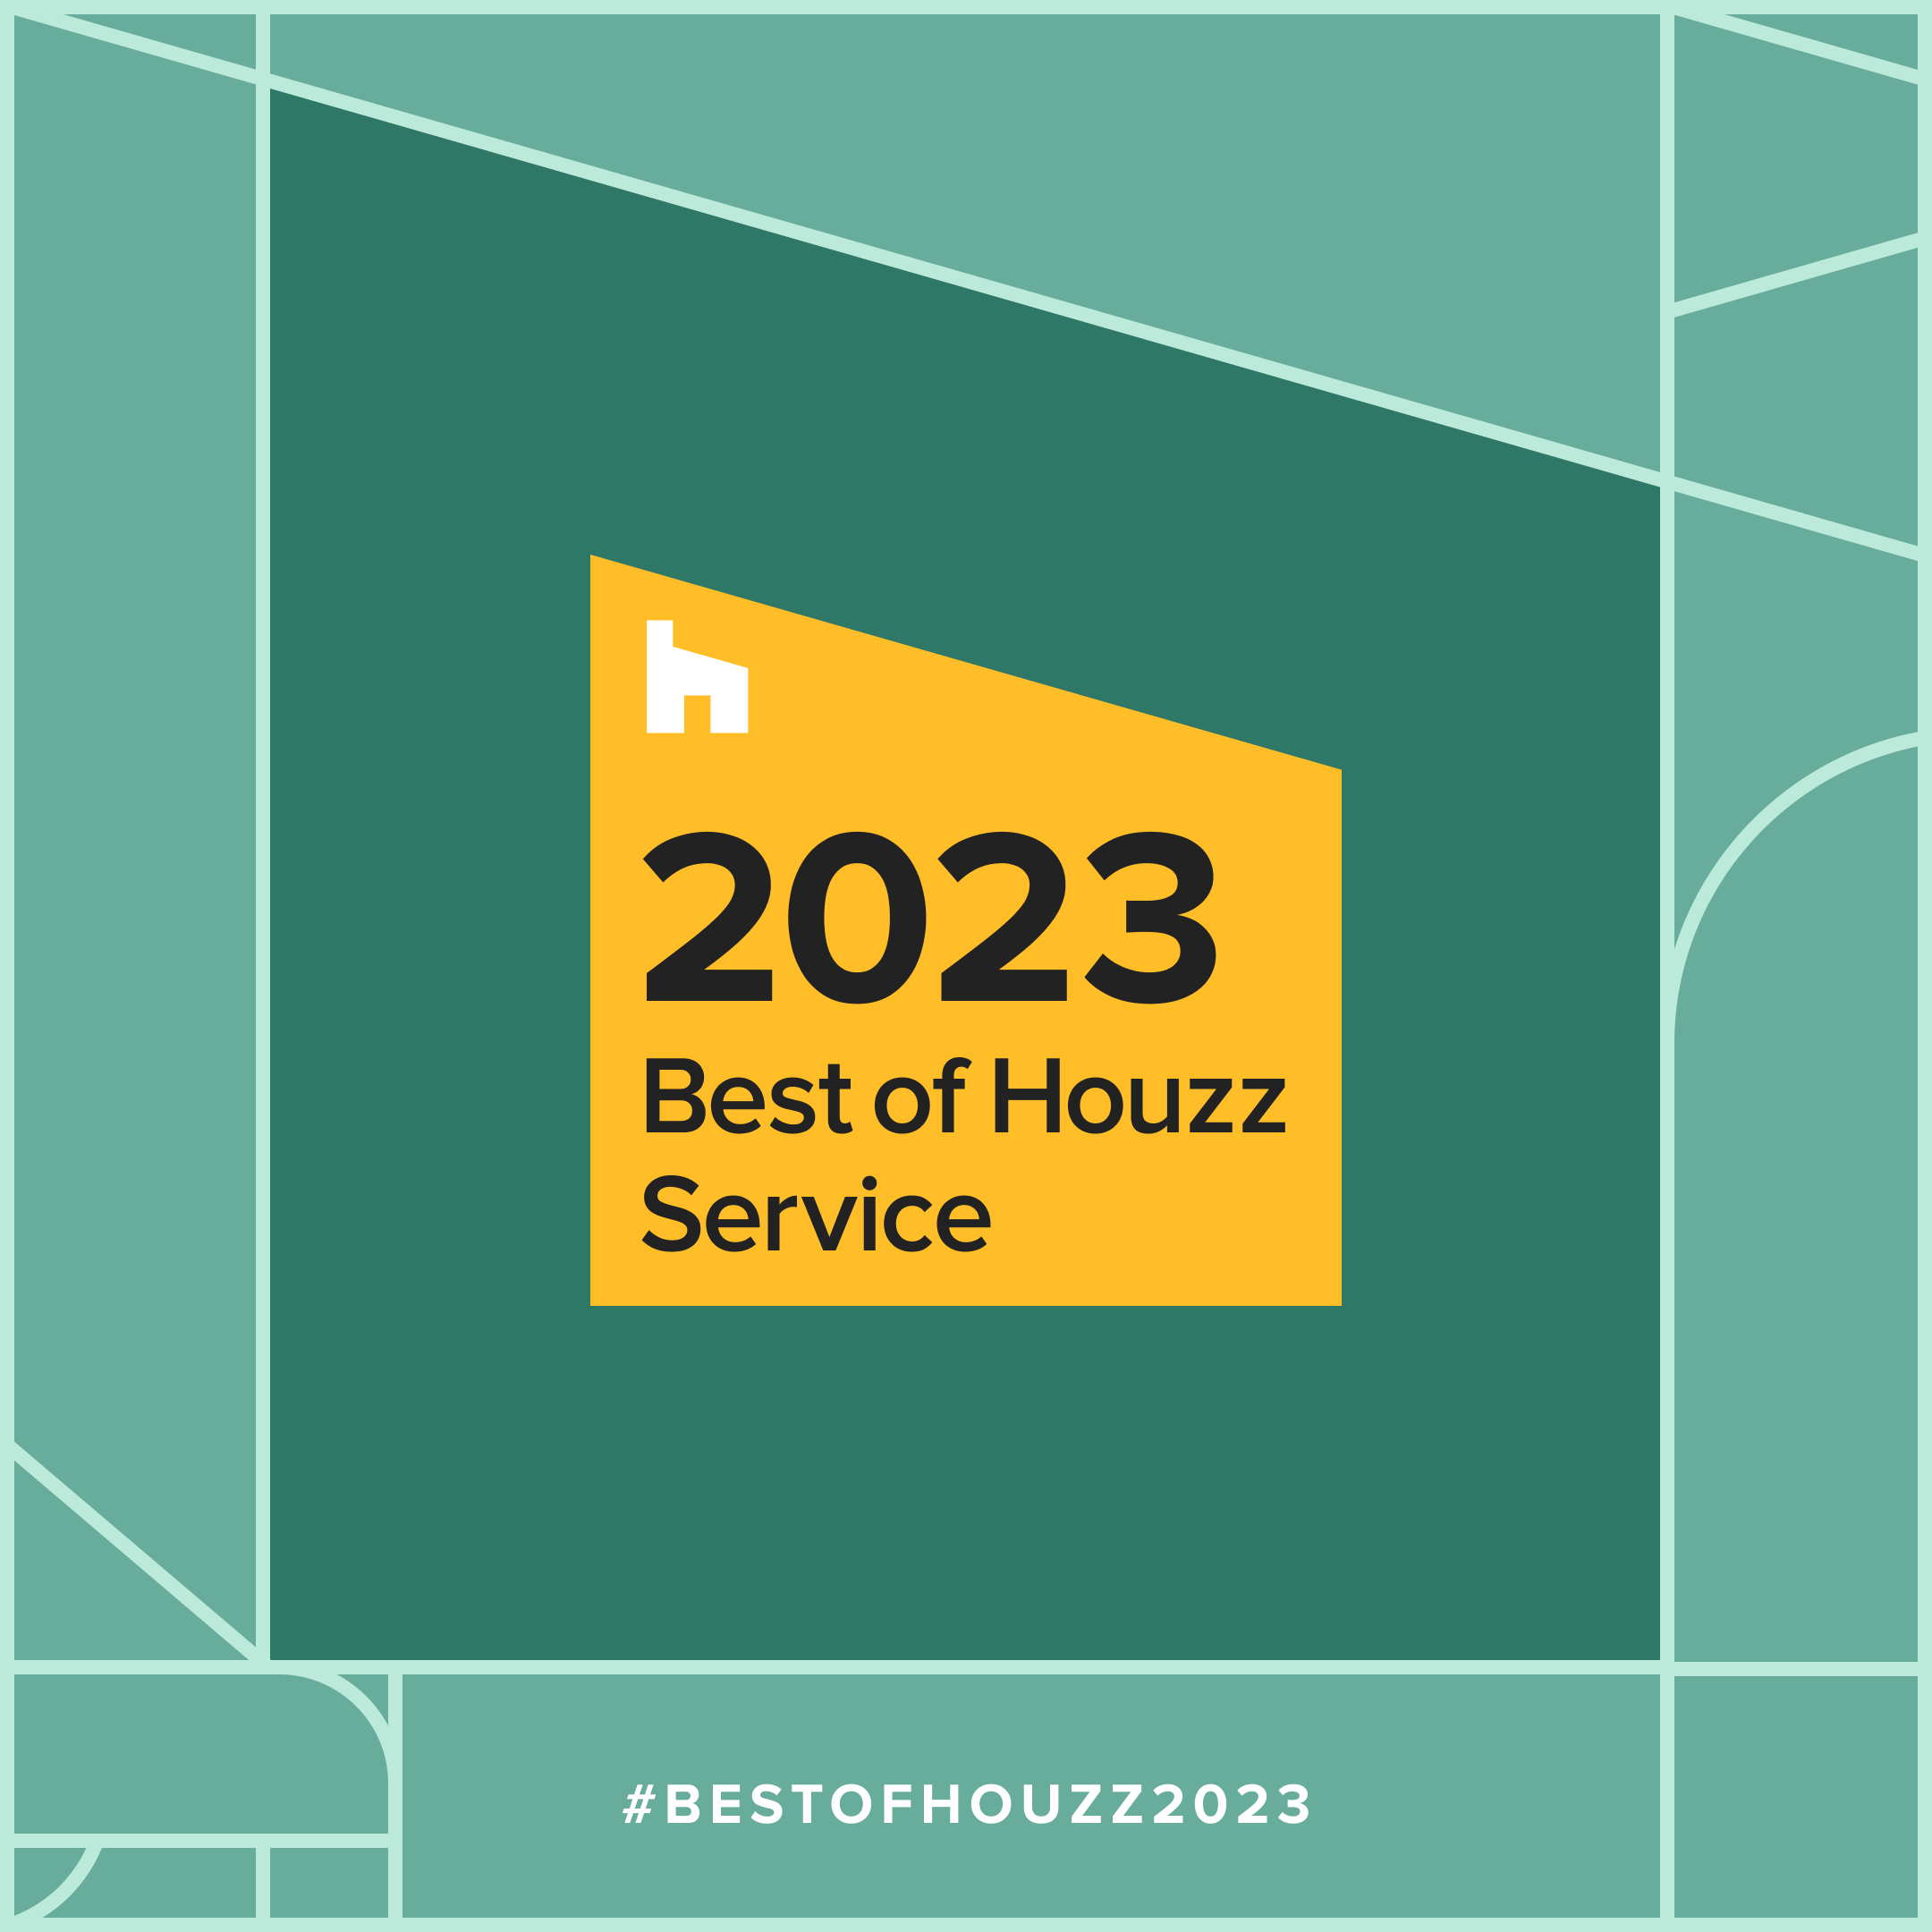 Paysagiste-Guethary-recompense-clients-jardins-Houzz-2023